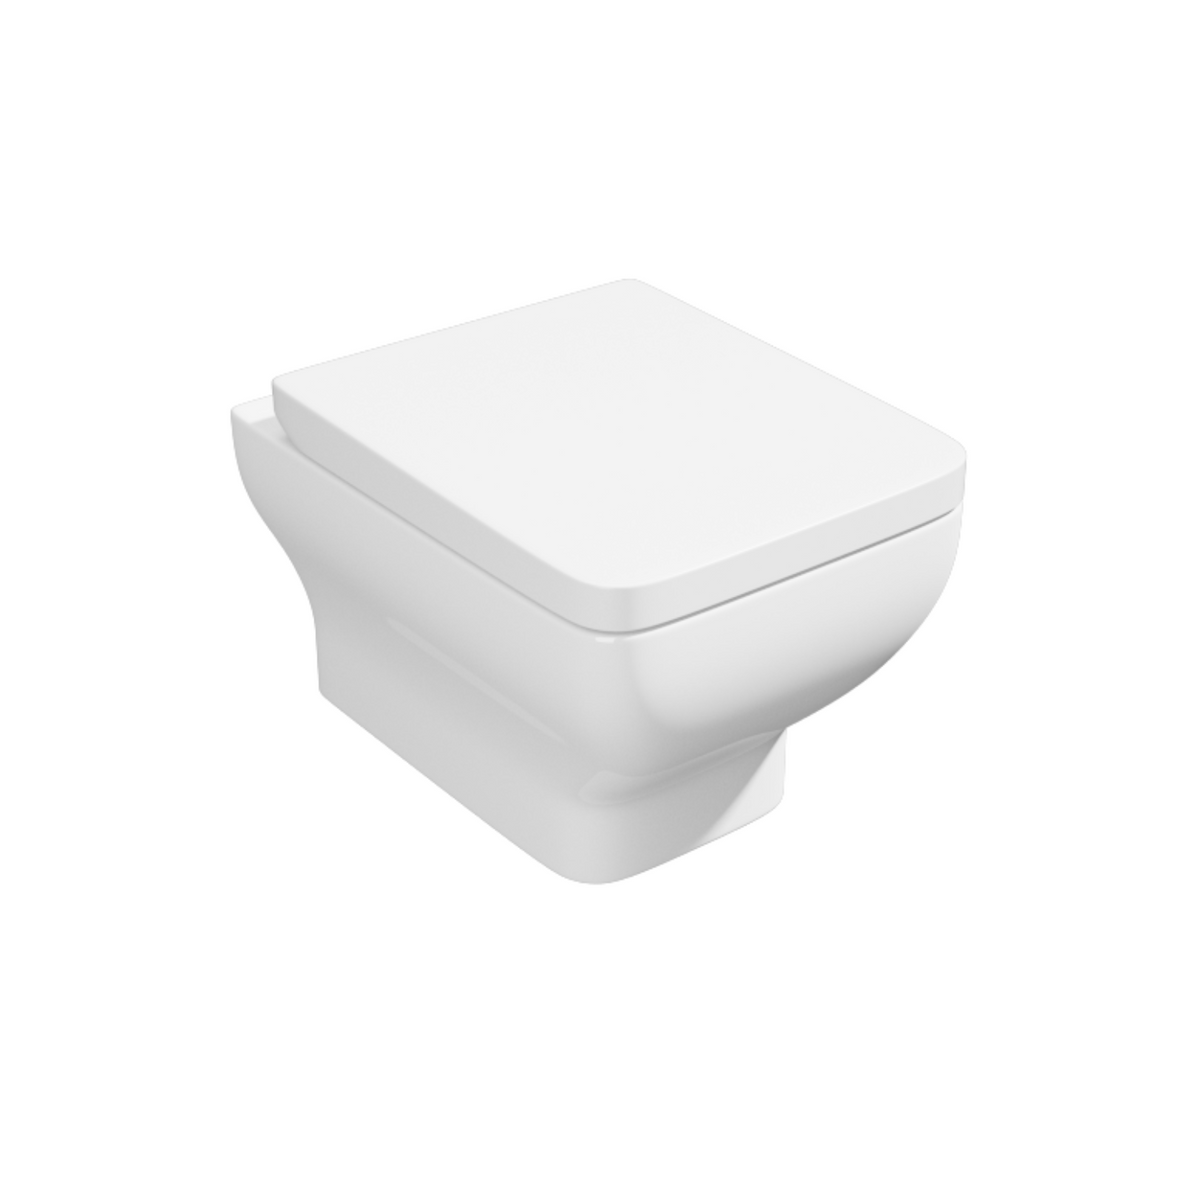 Kartell UK Options 600 Wall Hung WC Pan with Soft Close Seat